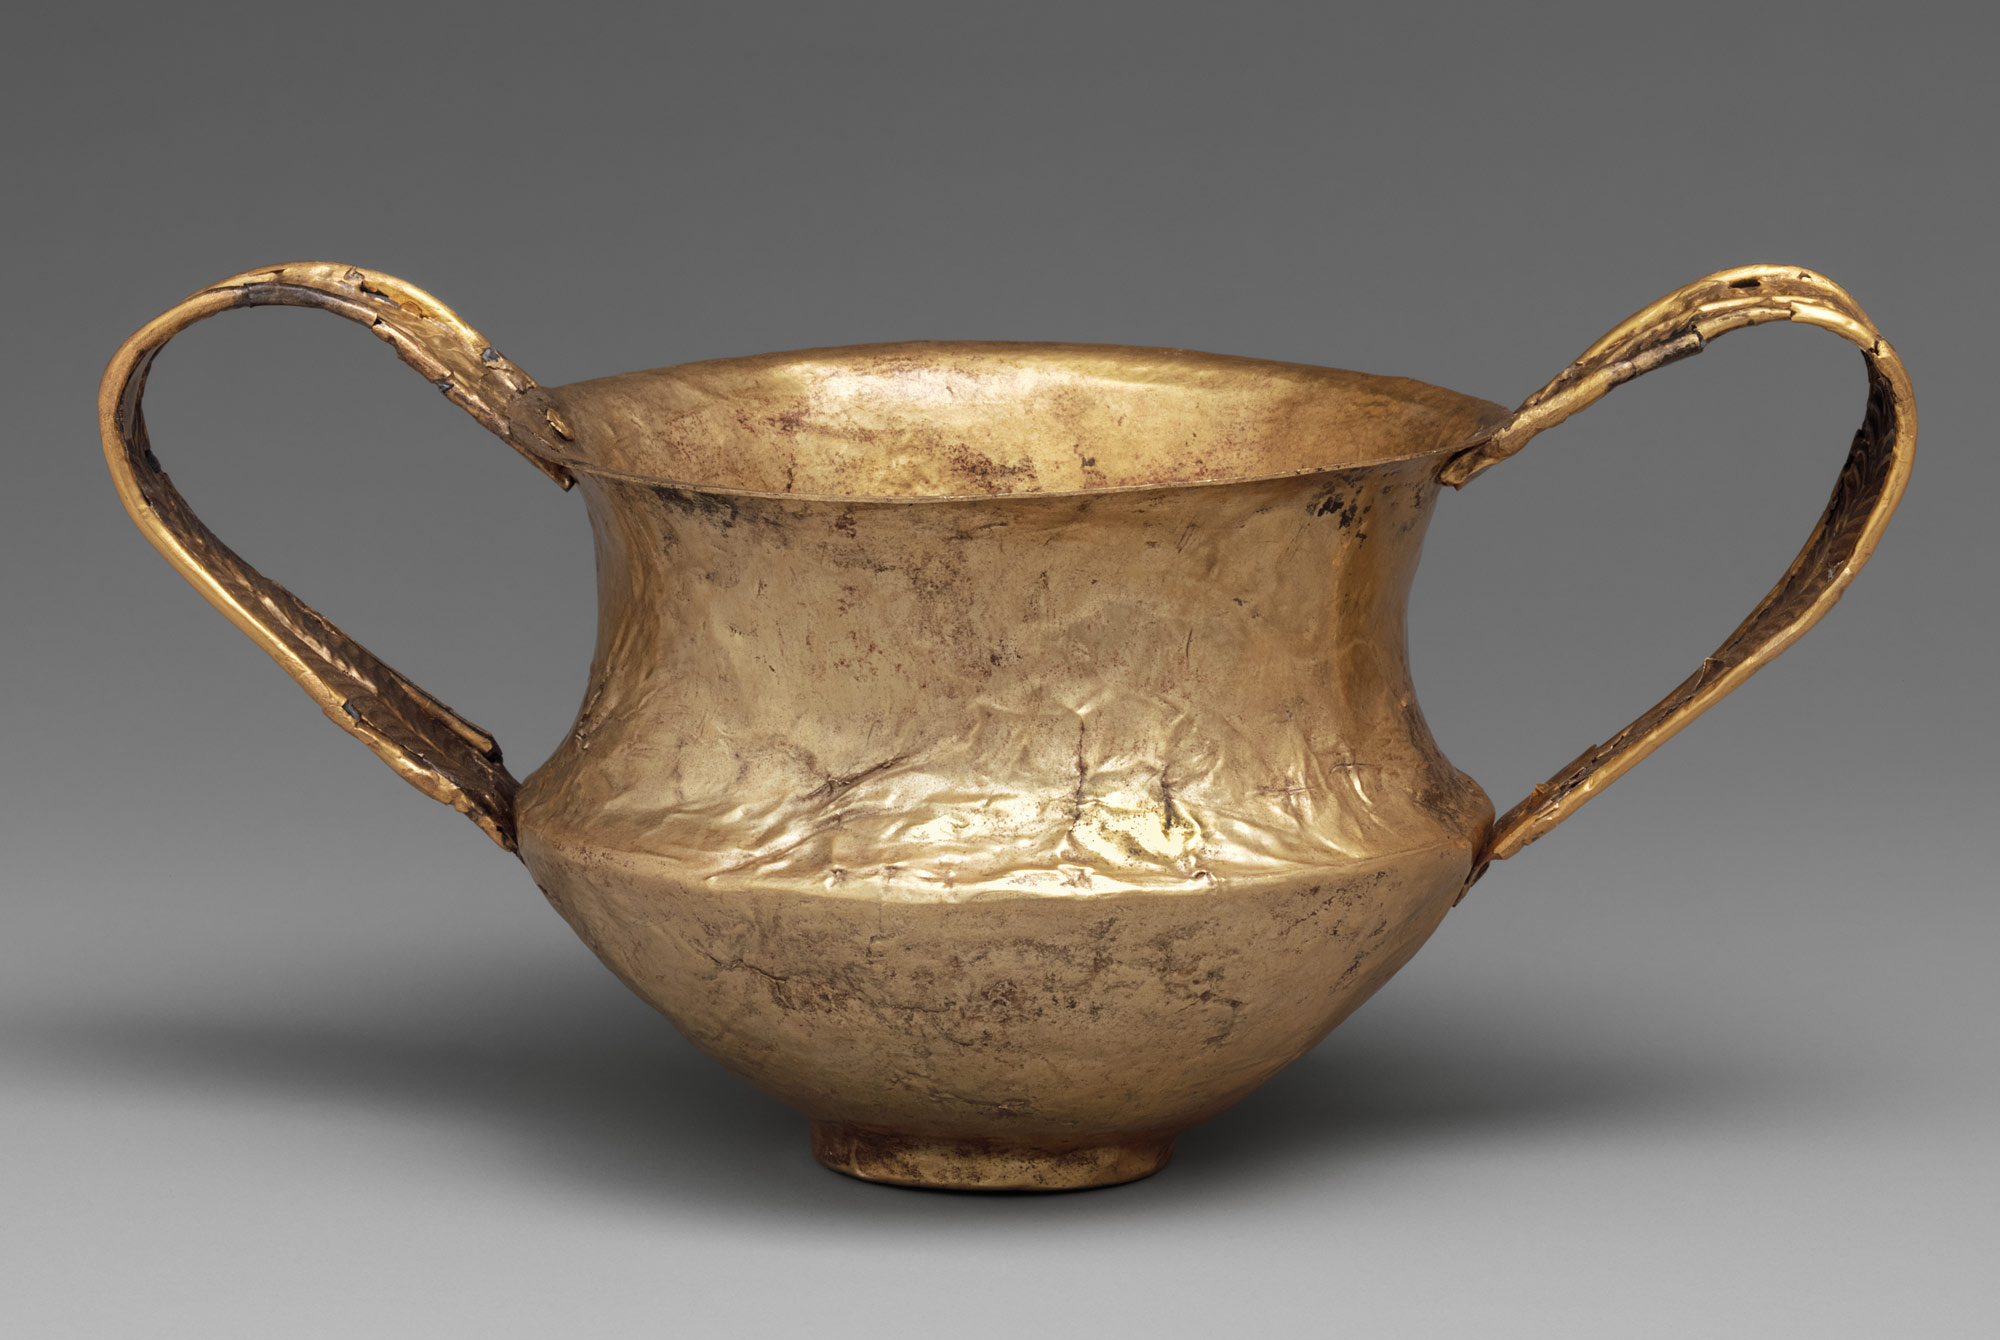 Gold kantharos (drinking cup with two high vertical handles)